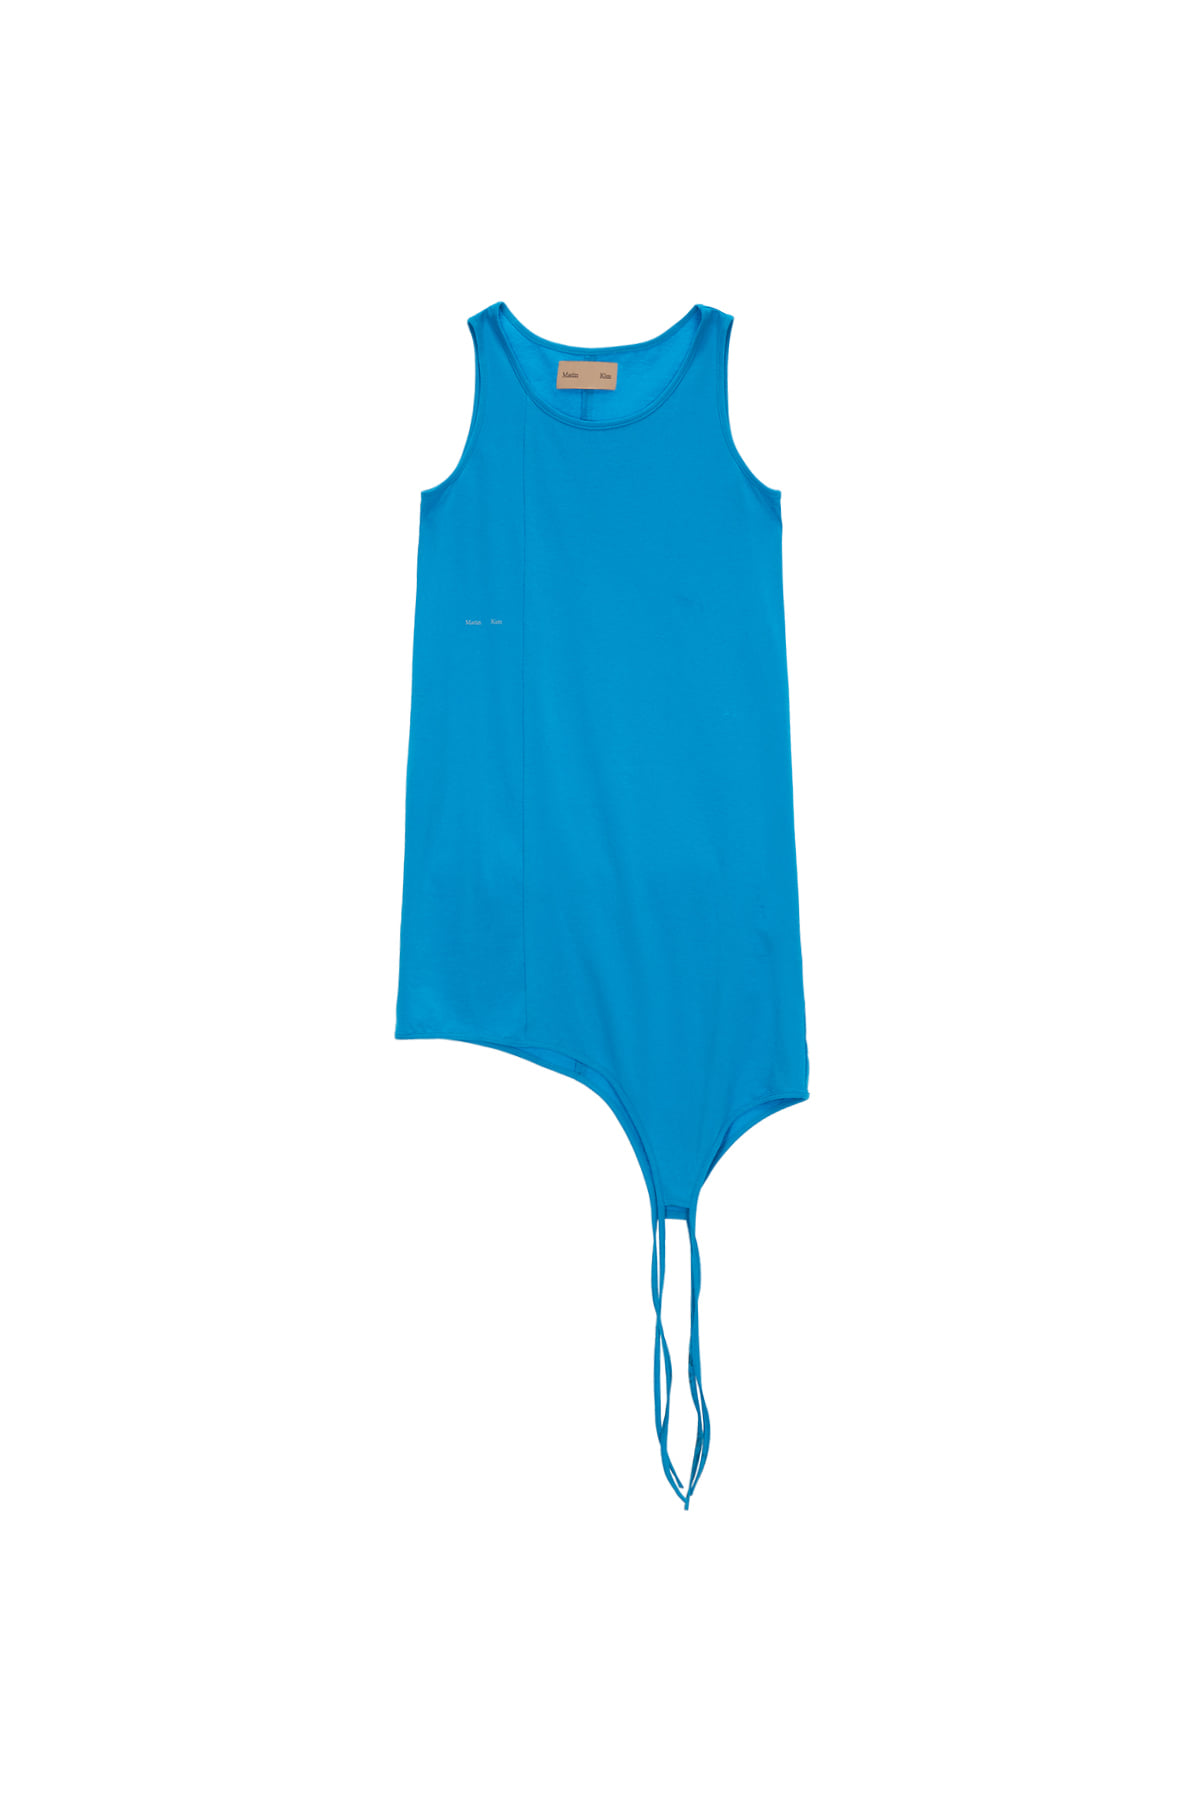 SLEEVELESS TAIL ONE PIECE IN BLUE